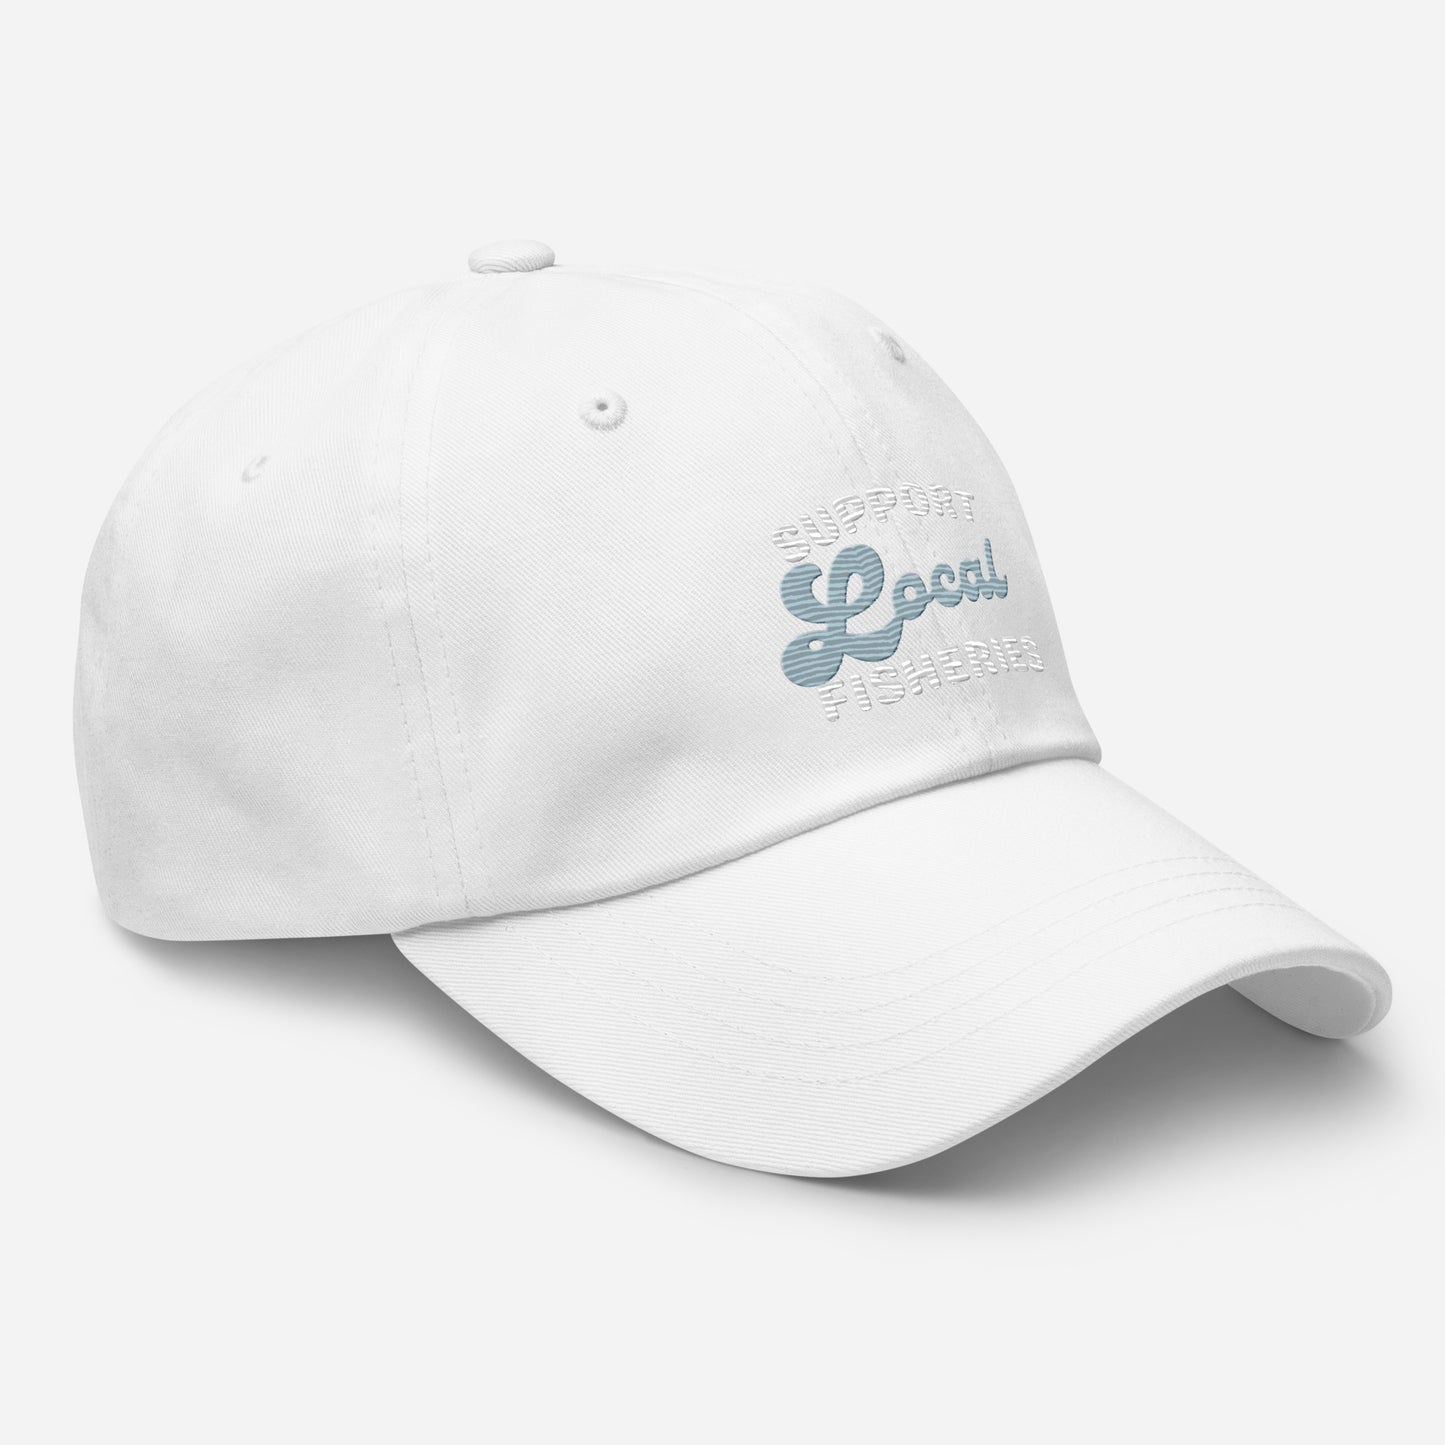 Local Fisheries Dad hat - Tropical Seas Clothing 